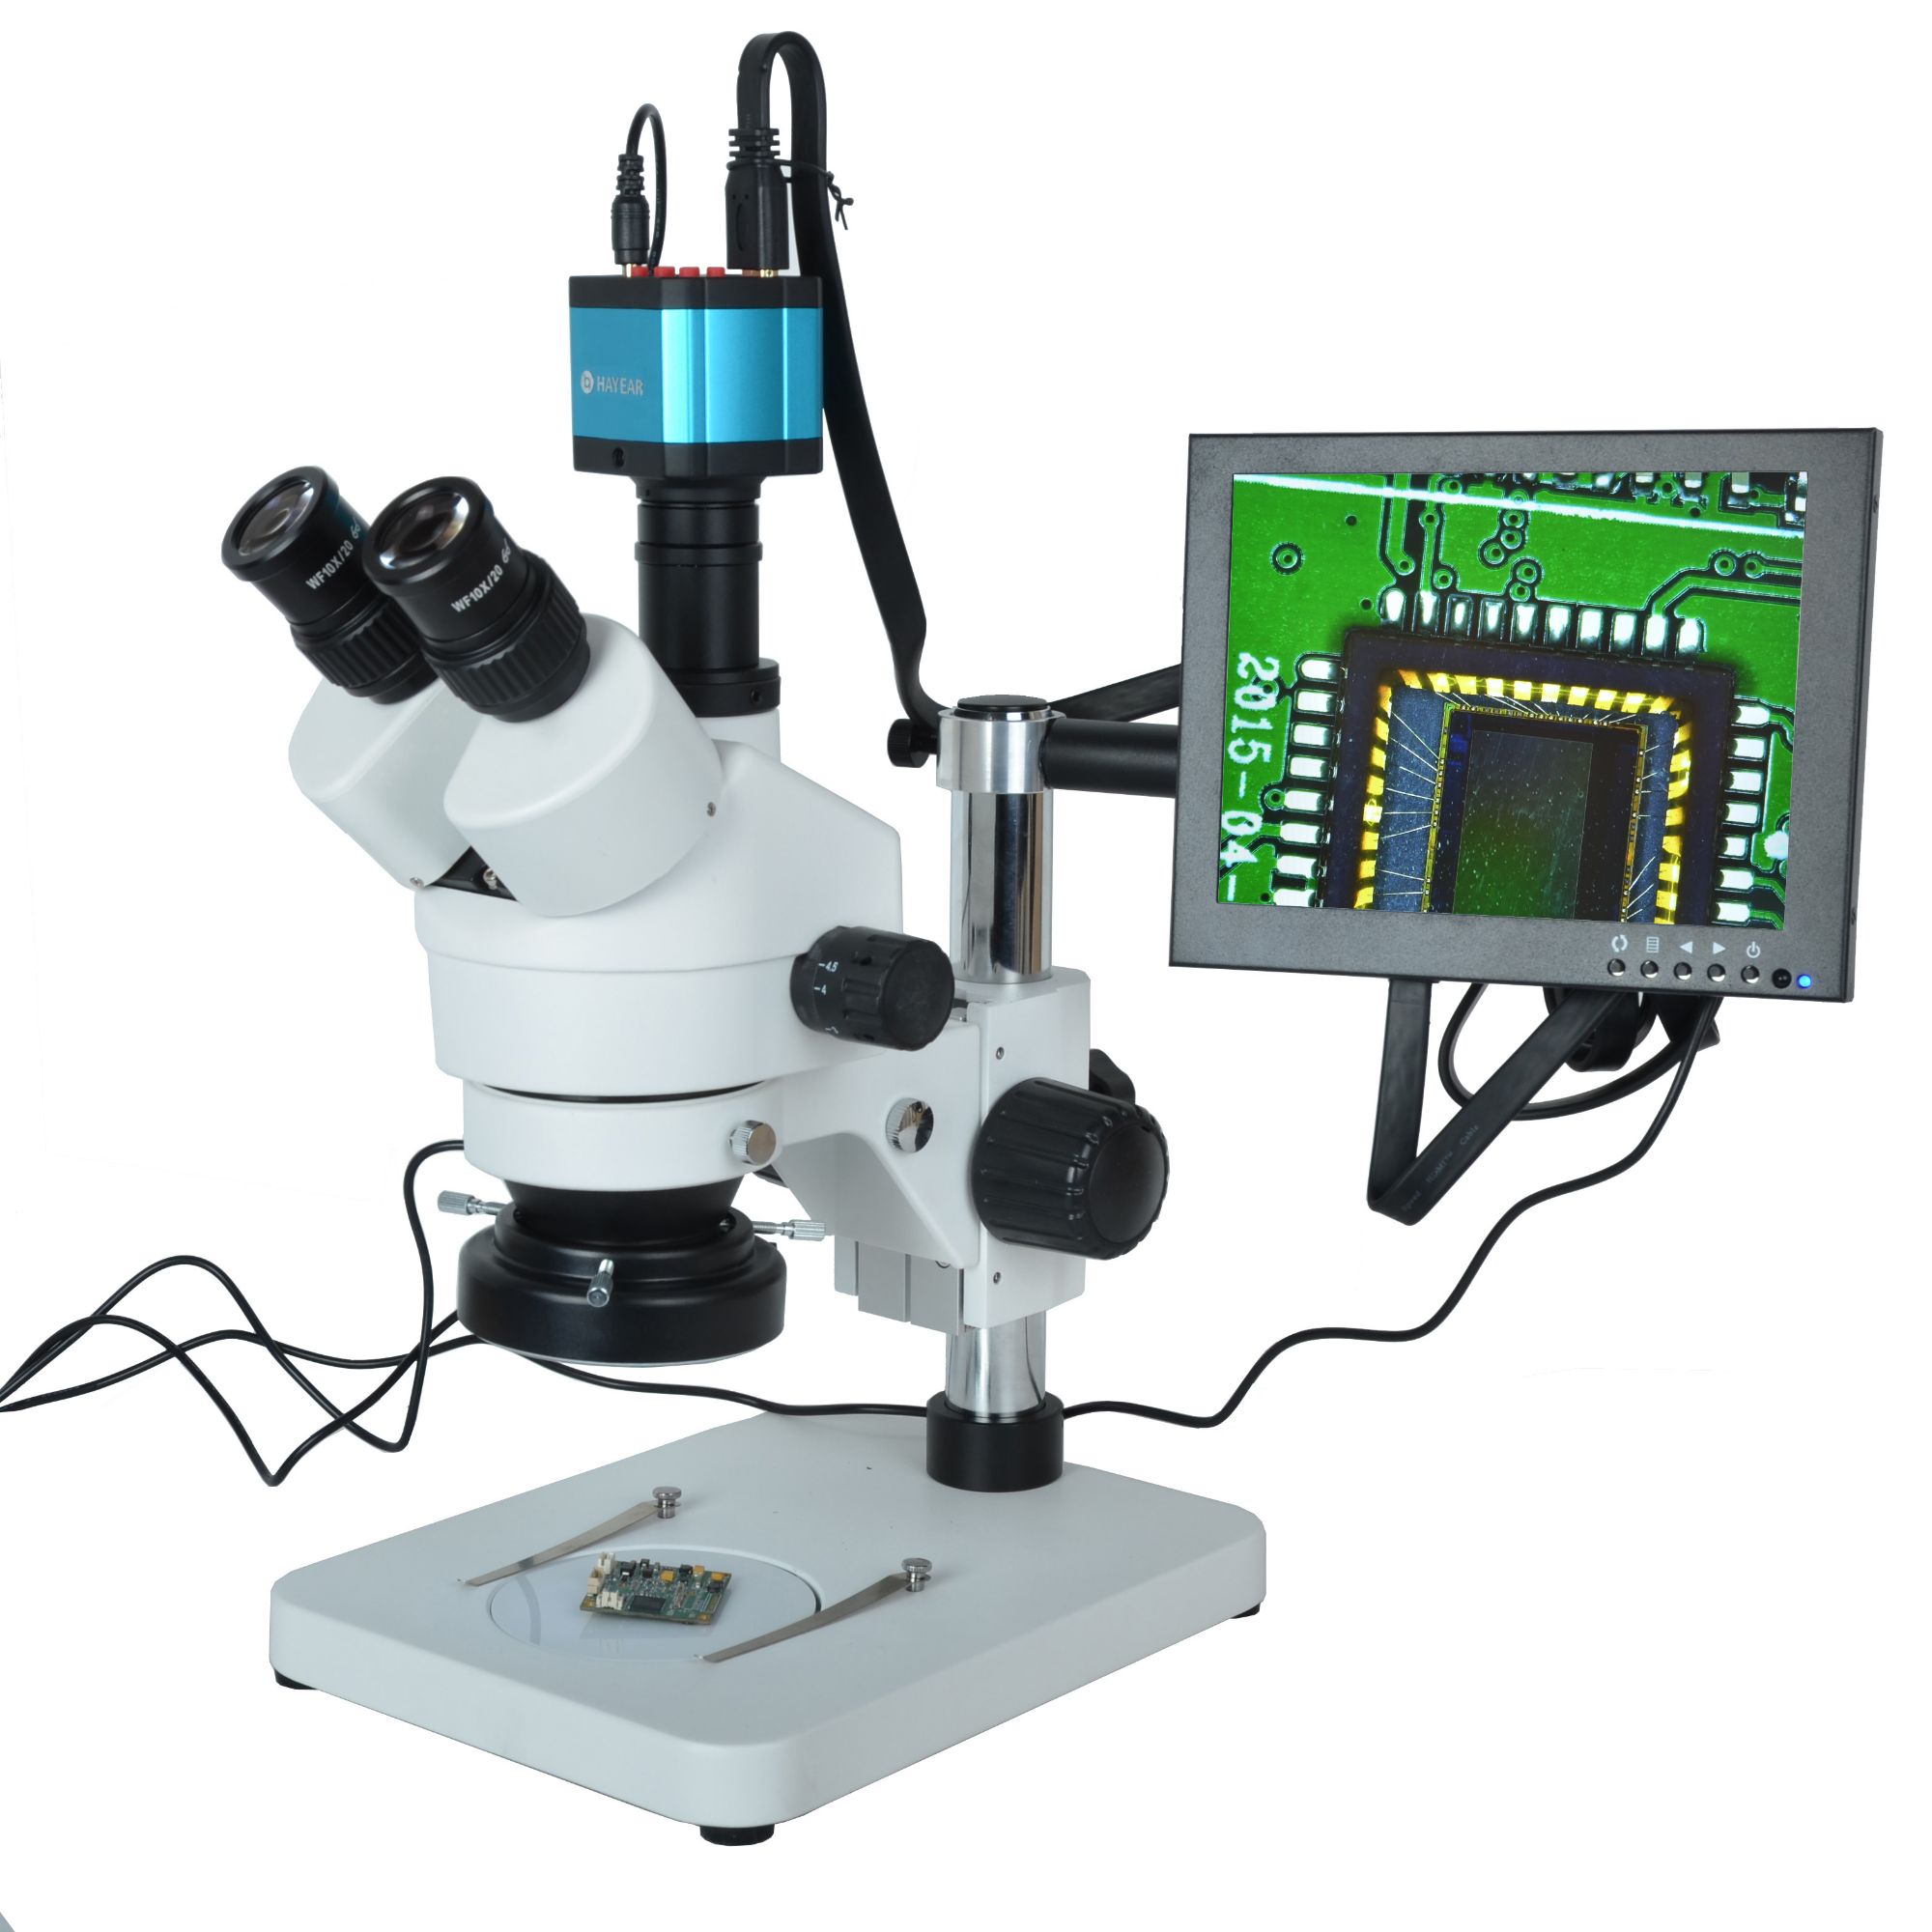 7X-45X Trinocular Microscope Inspection Zoom Stereo 14MP HDMI USB Calibrate Camera+144 LED Ring Light+8 inch HD HDMI LCD Monitor